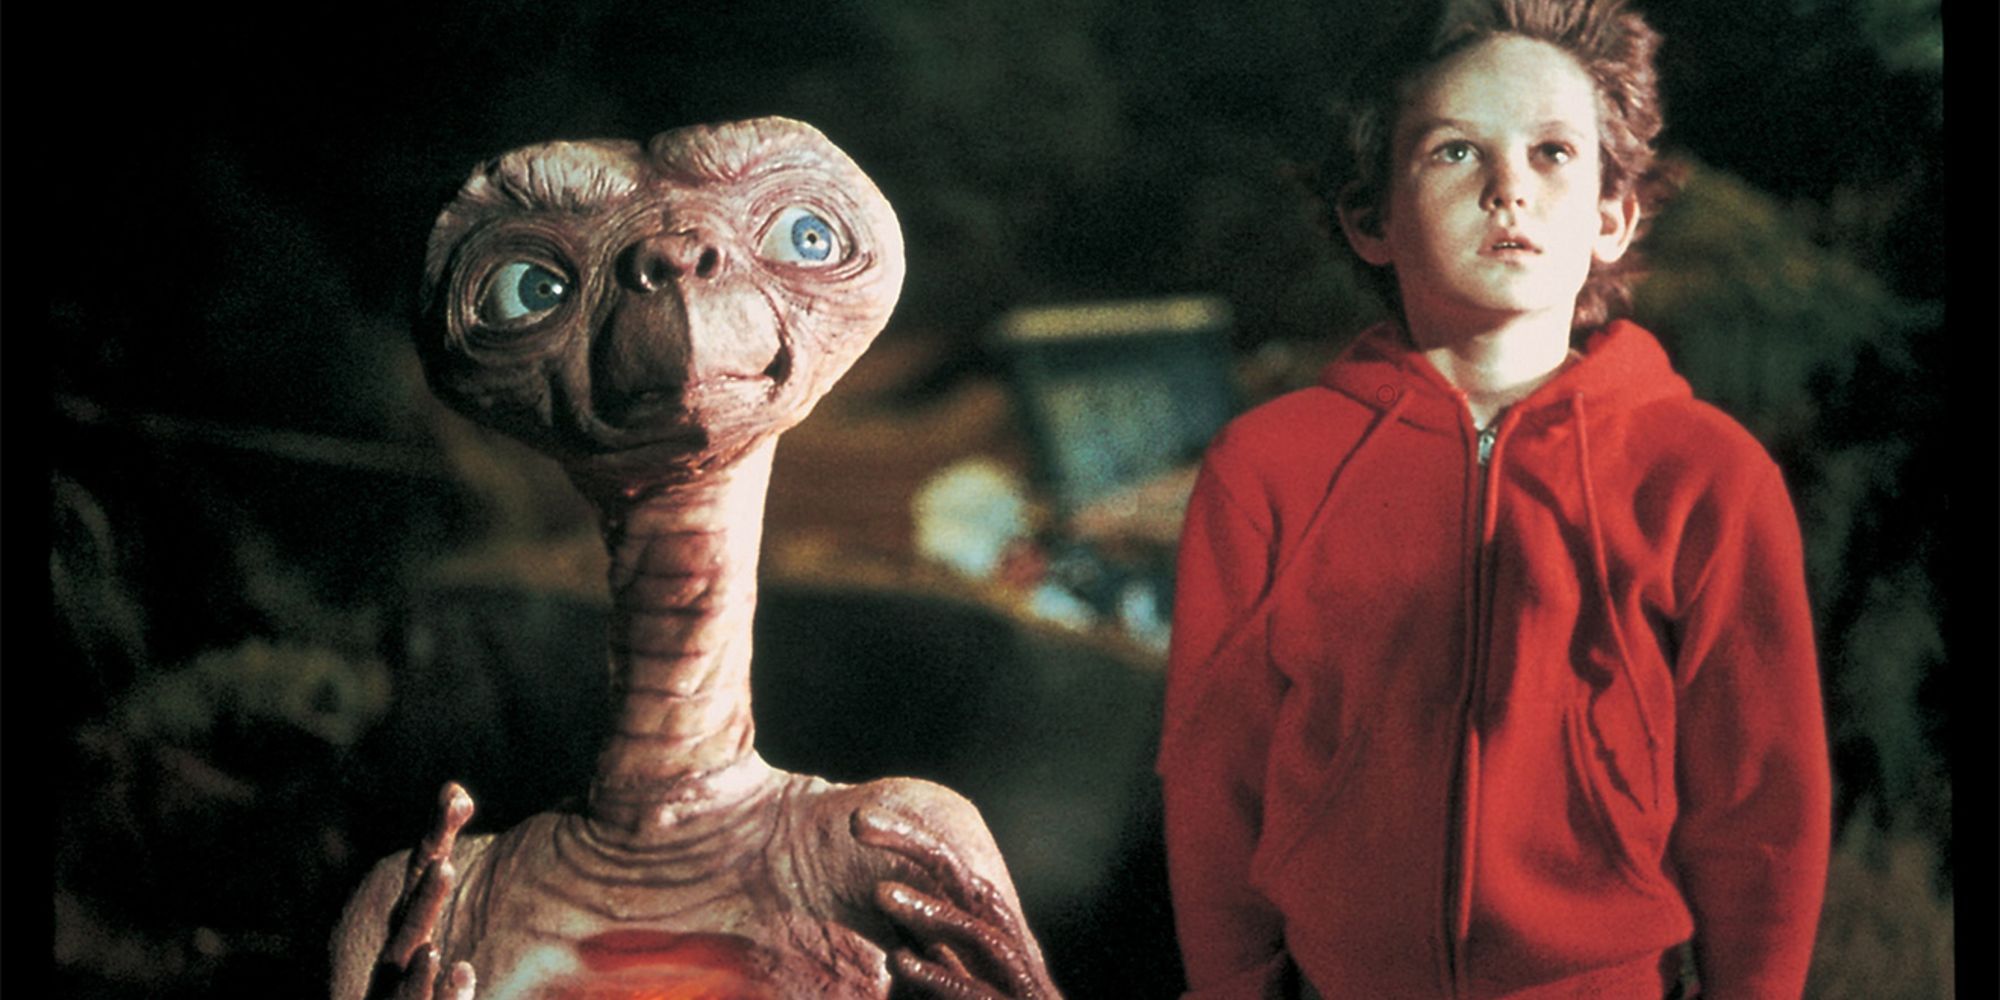 E.T. and Elliott standing together